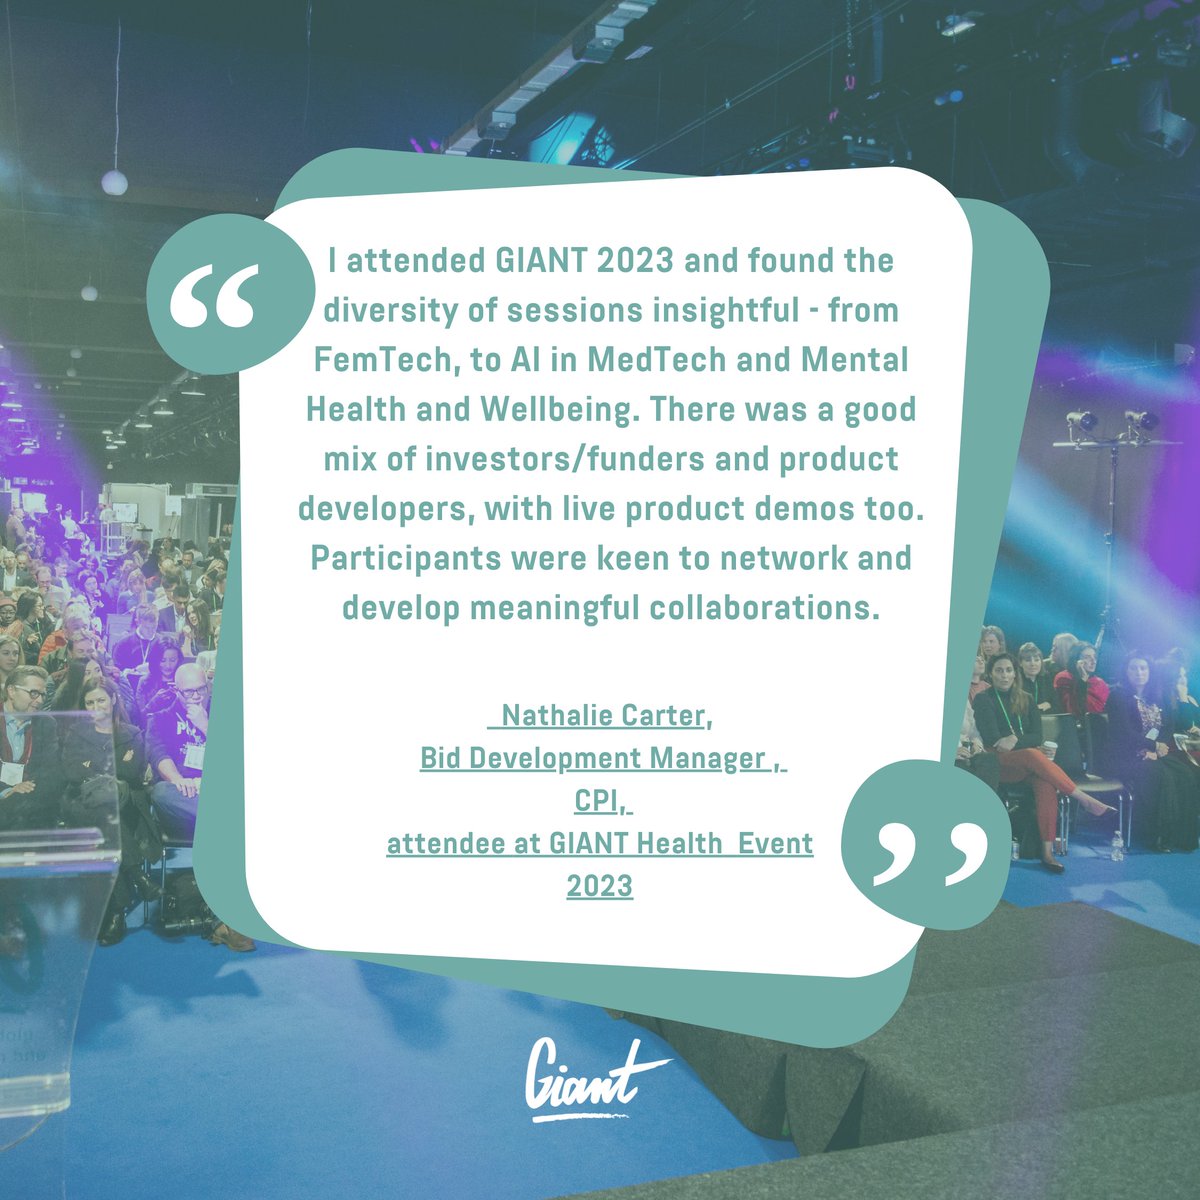 It's #WednesdayMotivation 🍀💪 We appreciate all of the valuable feedback we receive from our attendees, exhibitors & sponsors! Nathalie Carter, Bid Development Manager @ukCPI, attendee at #GIANT2023 #healthcare #thankyou #digitalhealth #healthtech #innovation